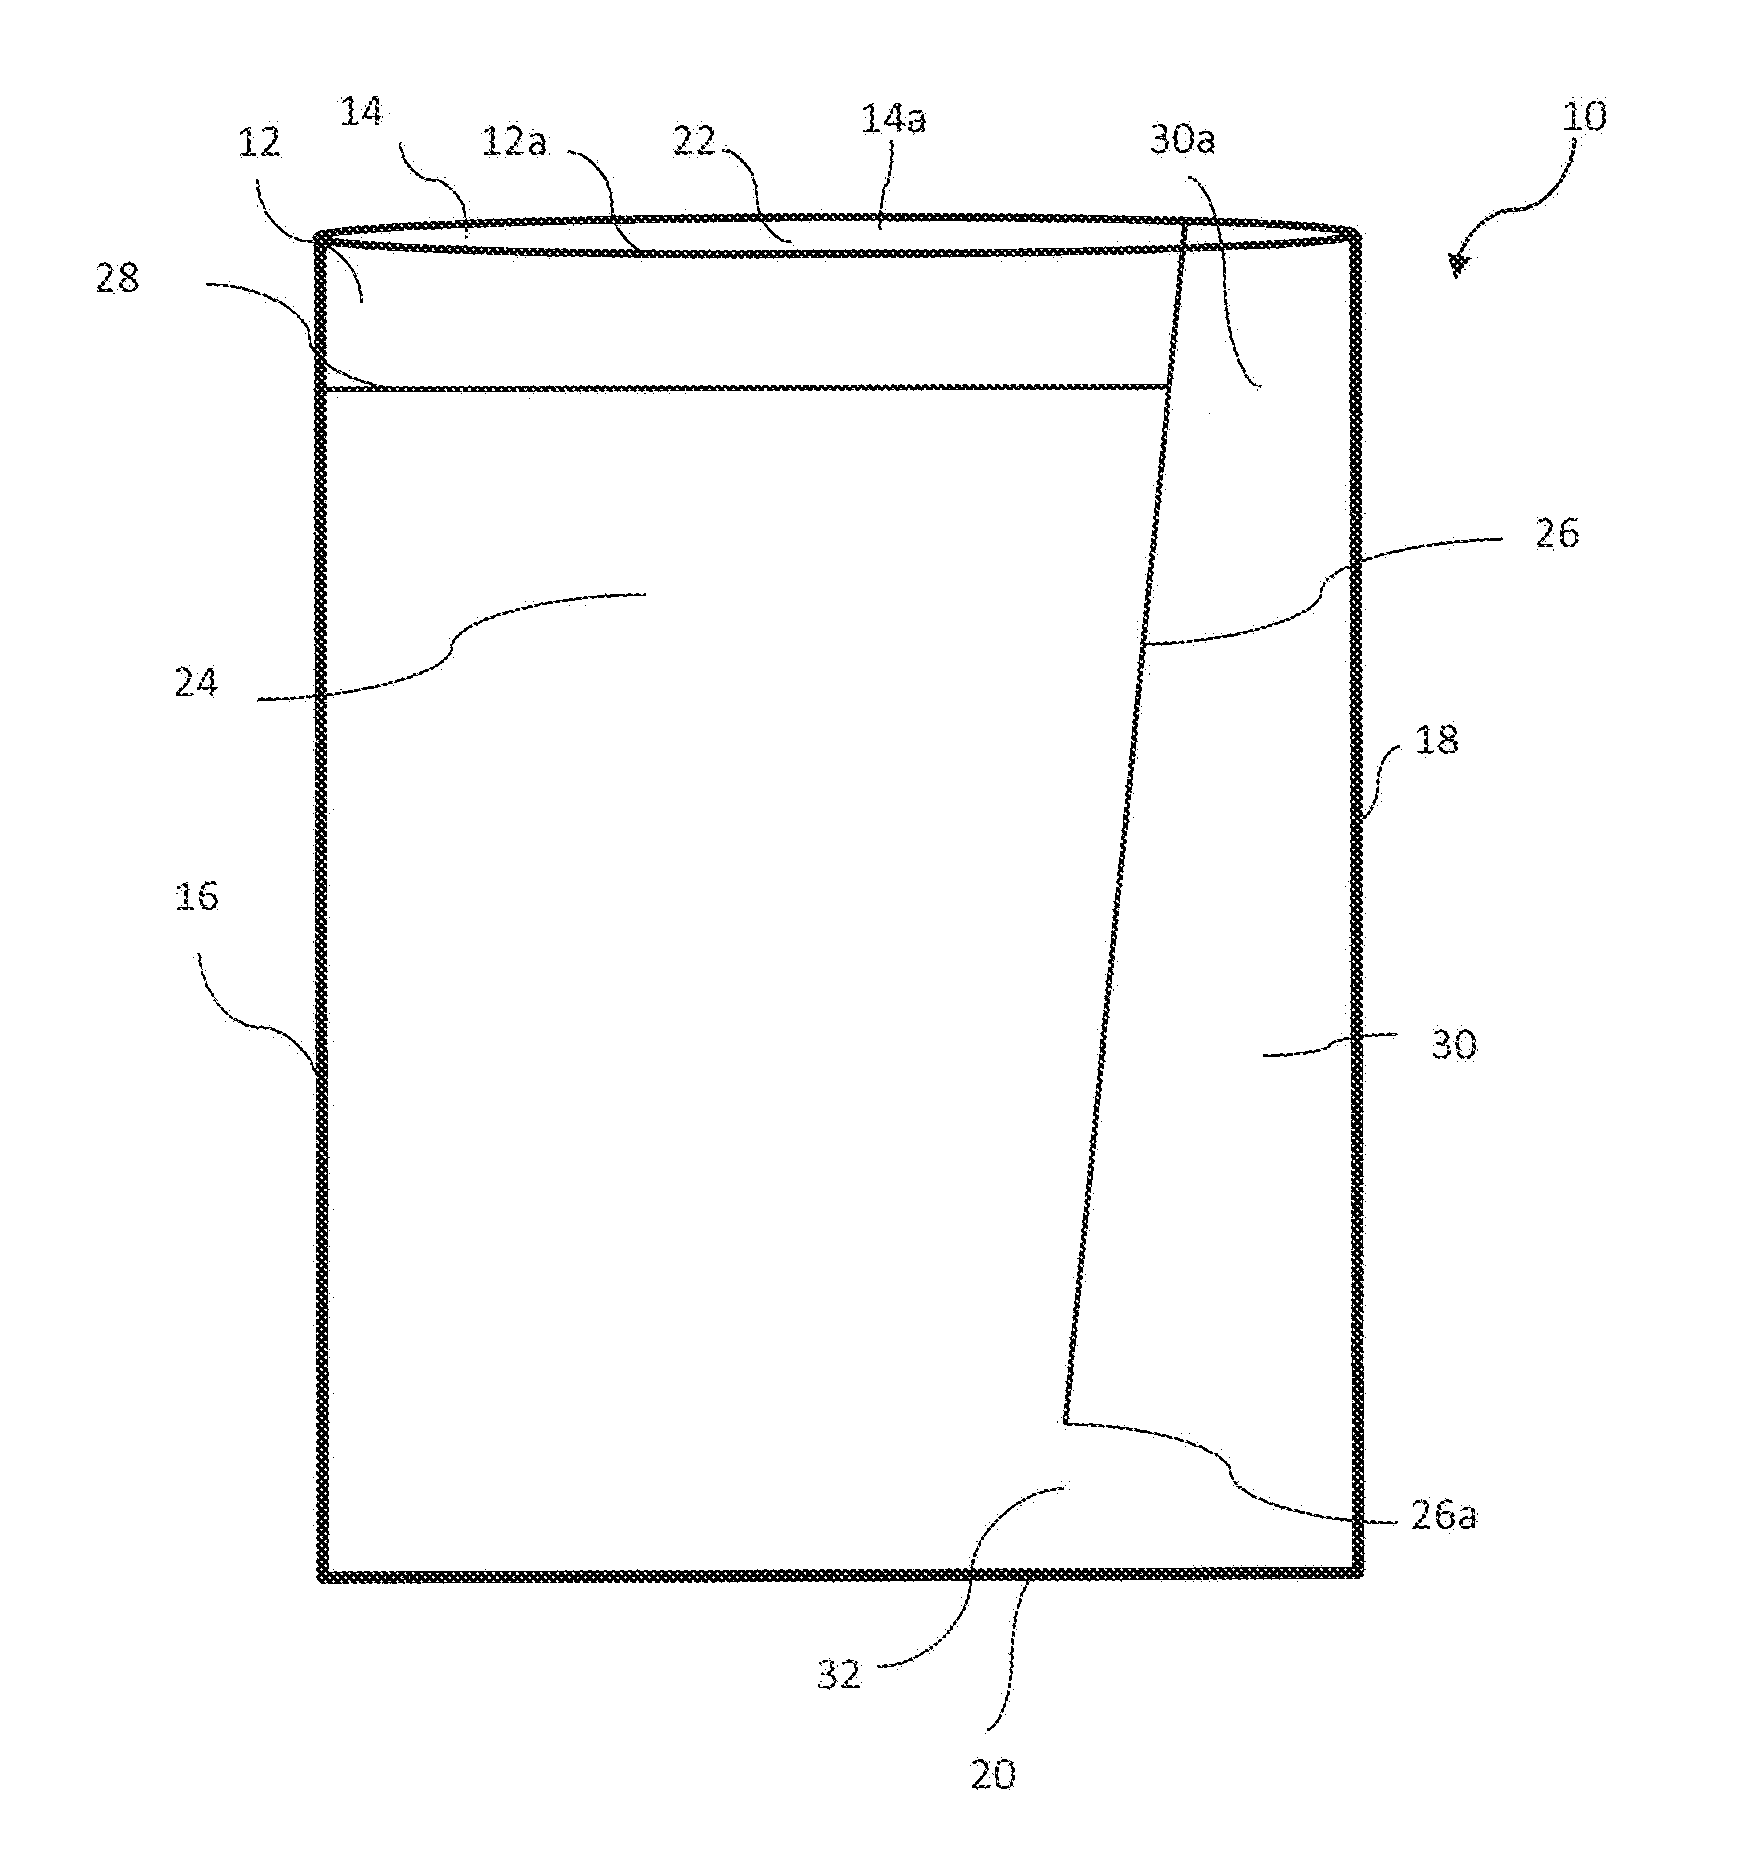 Apparatus, Systems and Methods for Preparing Food in Packages Having Integral Compartments